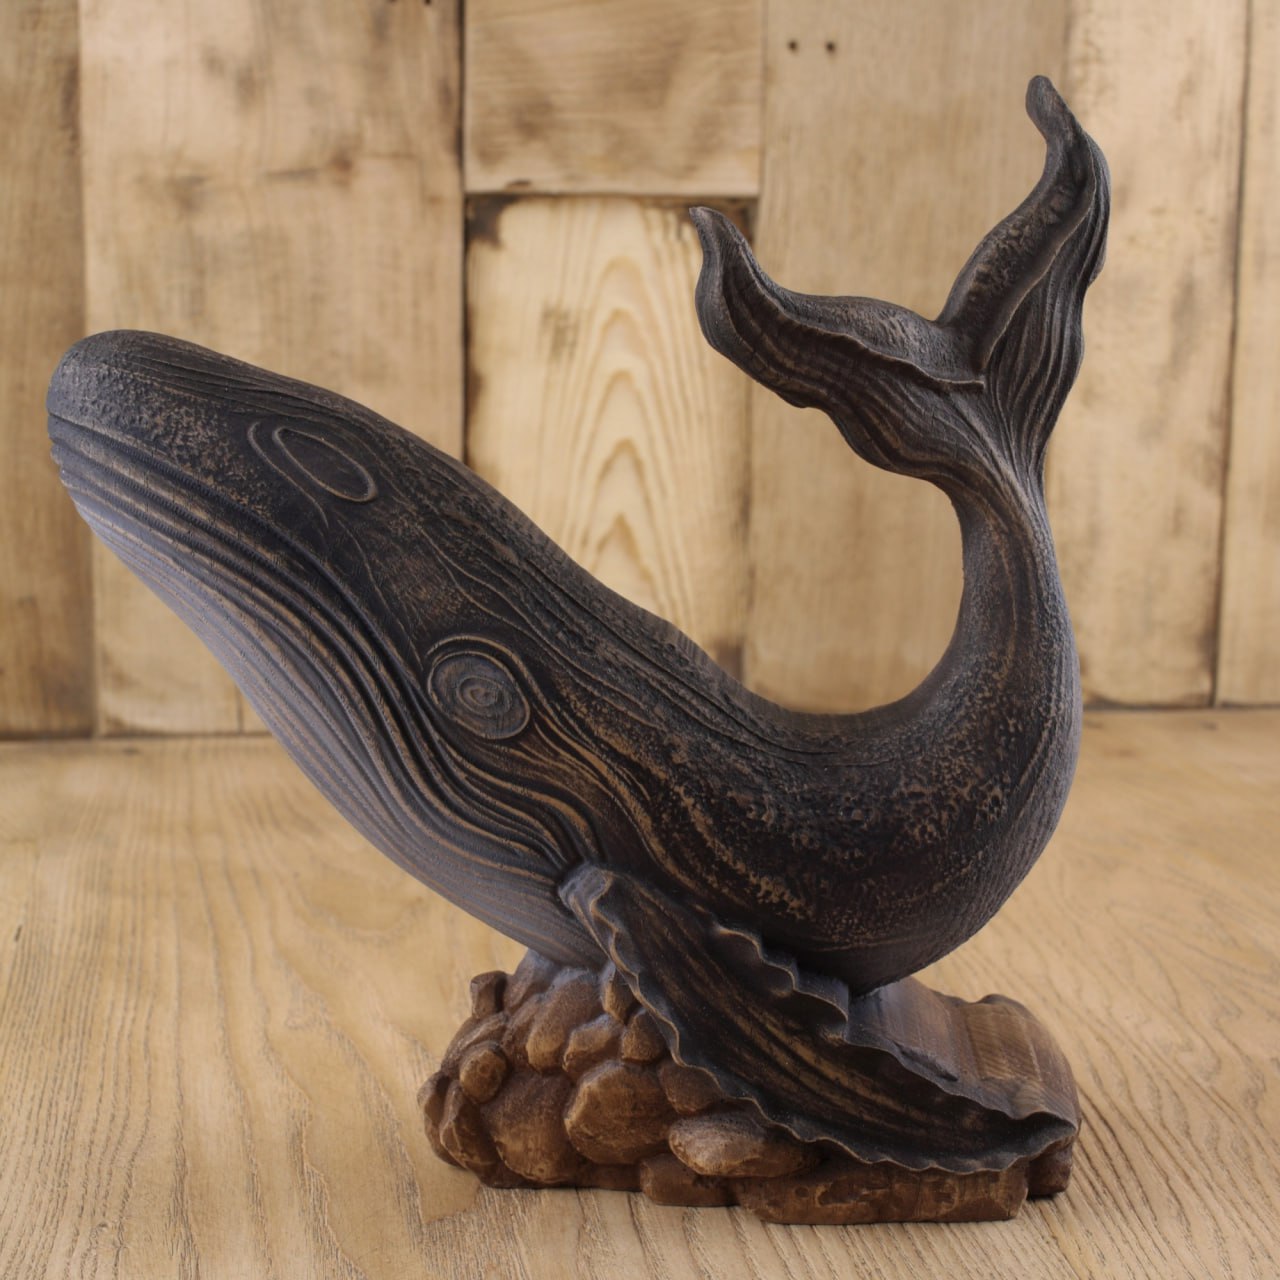 Handcrafted Wooden Whale Sculpture - Capturing the Grace and Magnificence of the Ocean